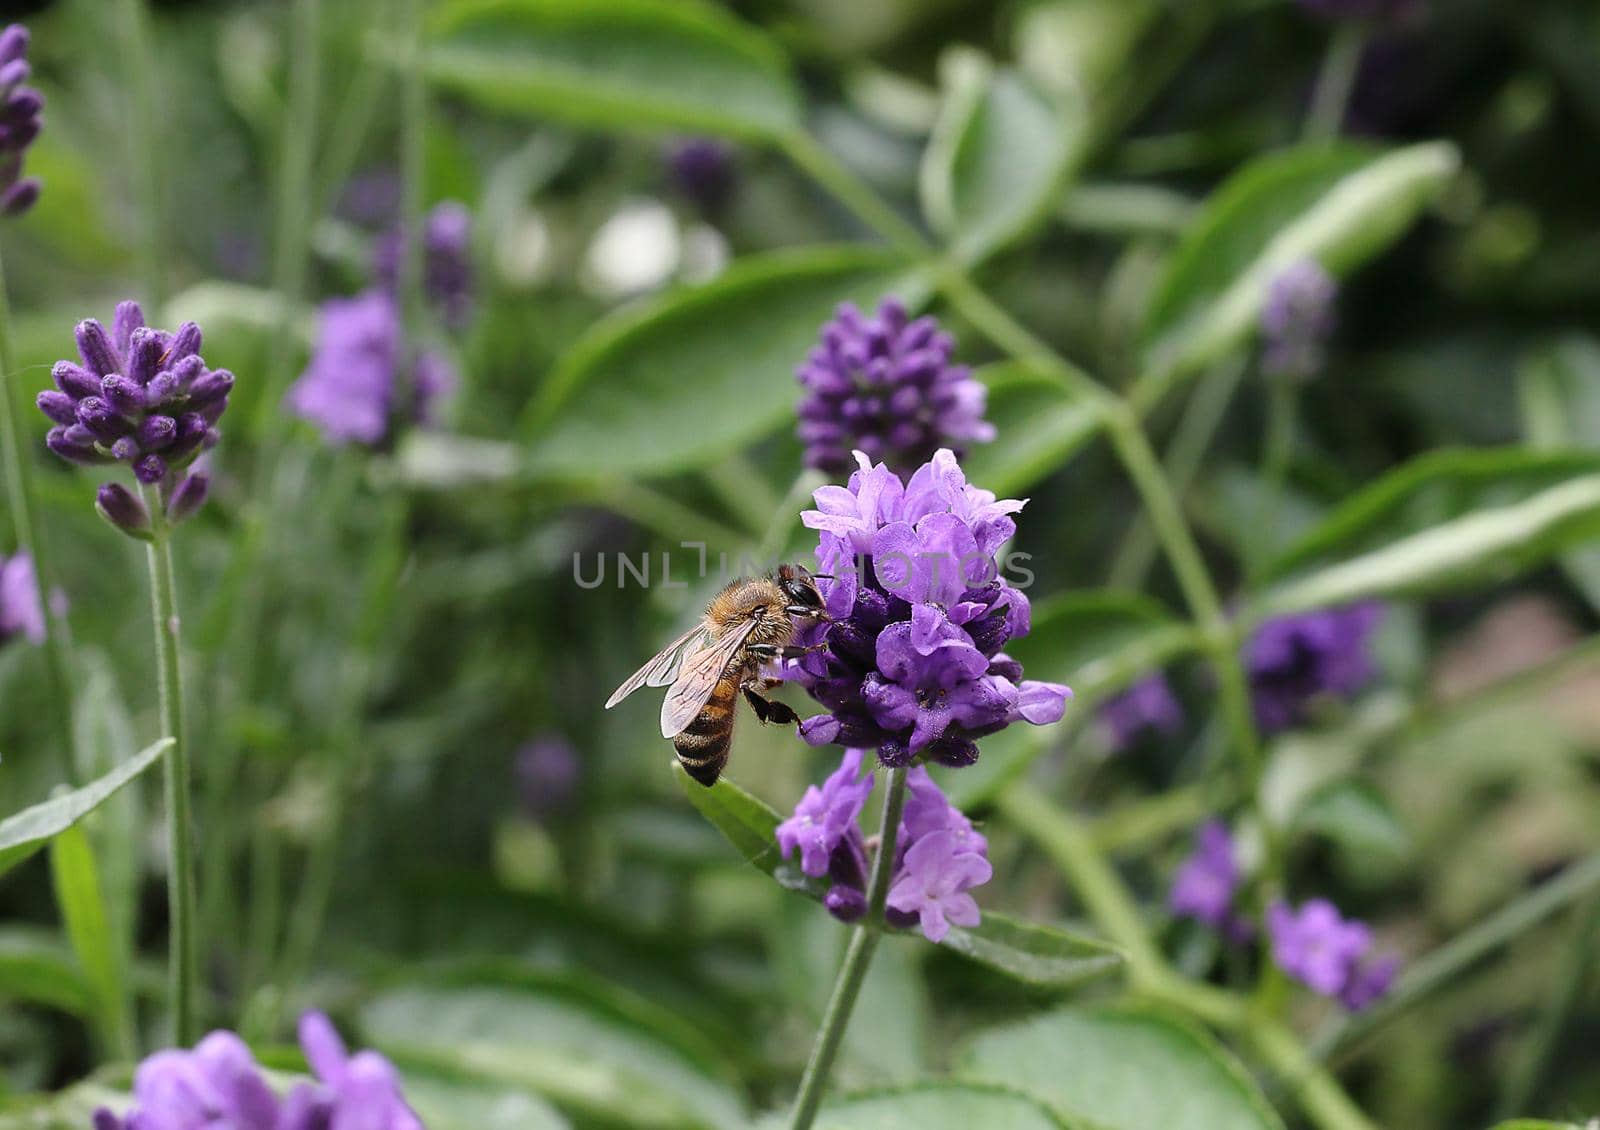 honey bee pollinates lavender flowers. Decay of plants by insects. Lavender flowers in the garden. Soft focus, blurred background. A bee pollinates lavender flowers. by Proxima13